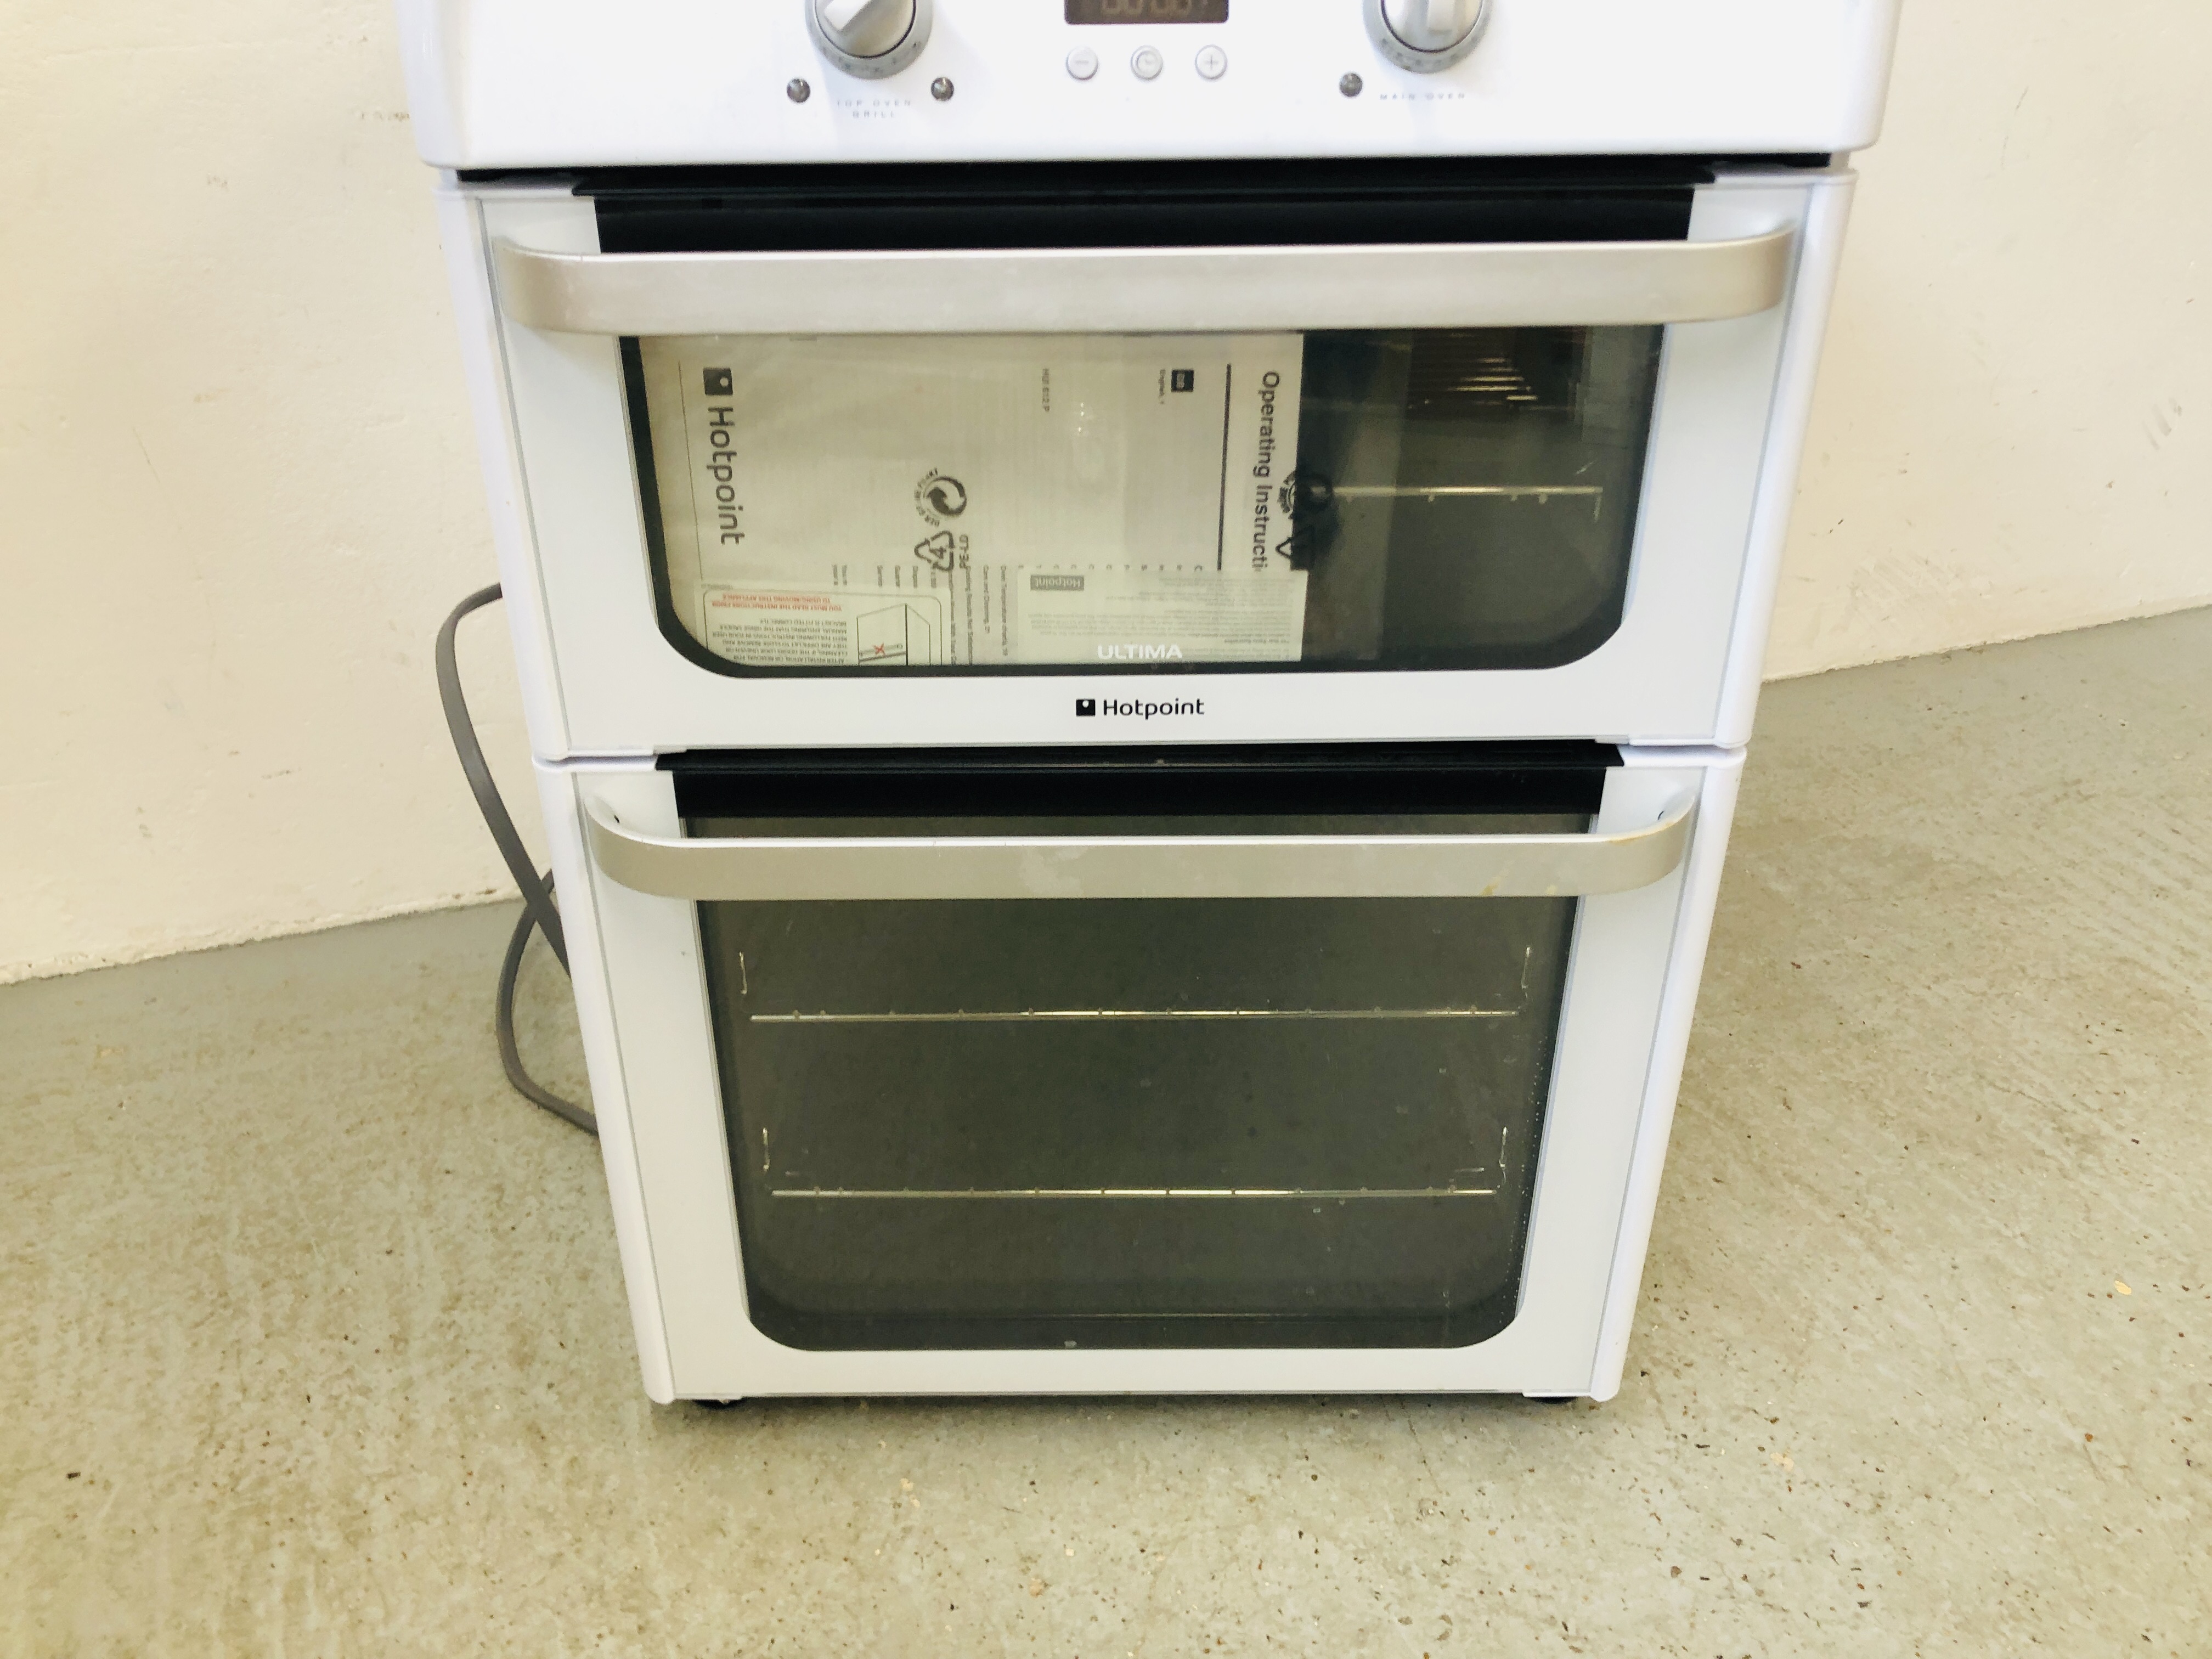 HOTPOINT ULTIMA ELECTRIC COOKER WITH INSTRUCTIONS - TRADE ONLY - SOLD AS SEEN. - Image 3 of 7